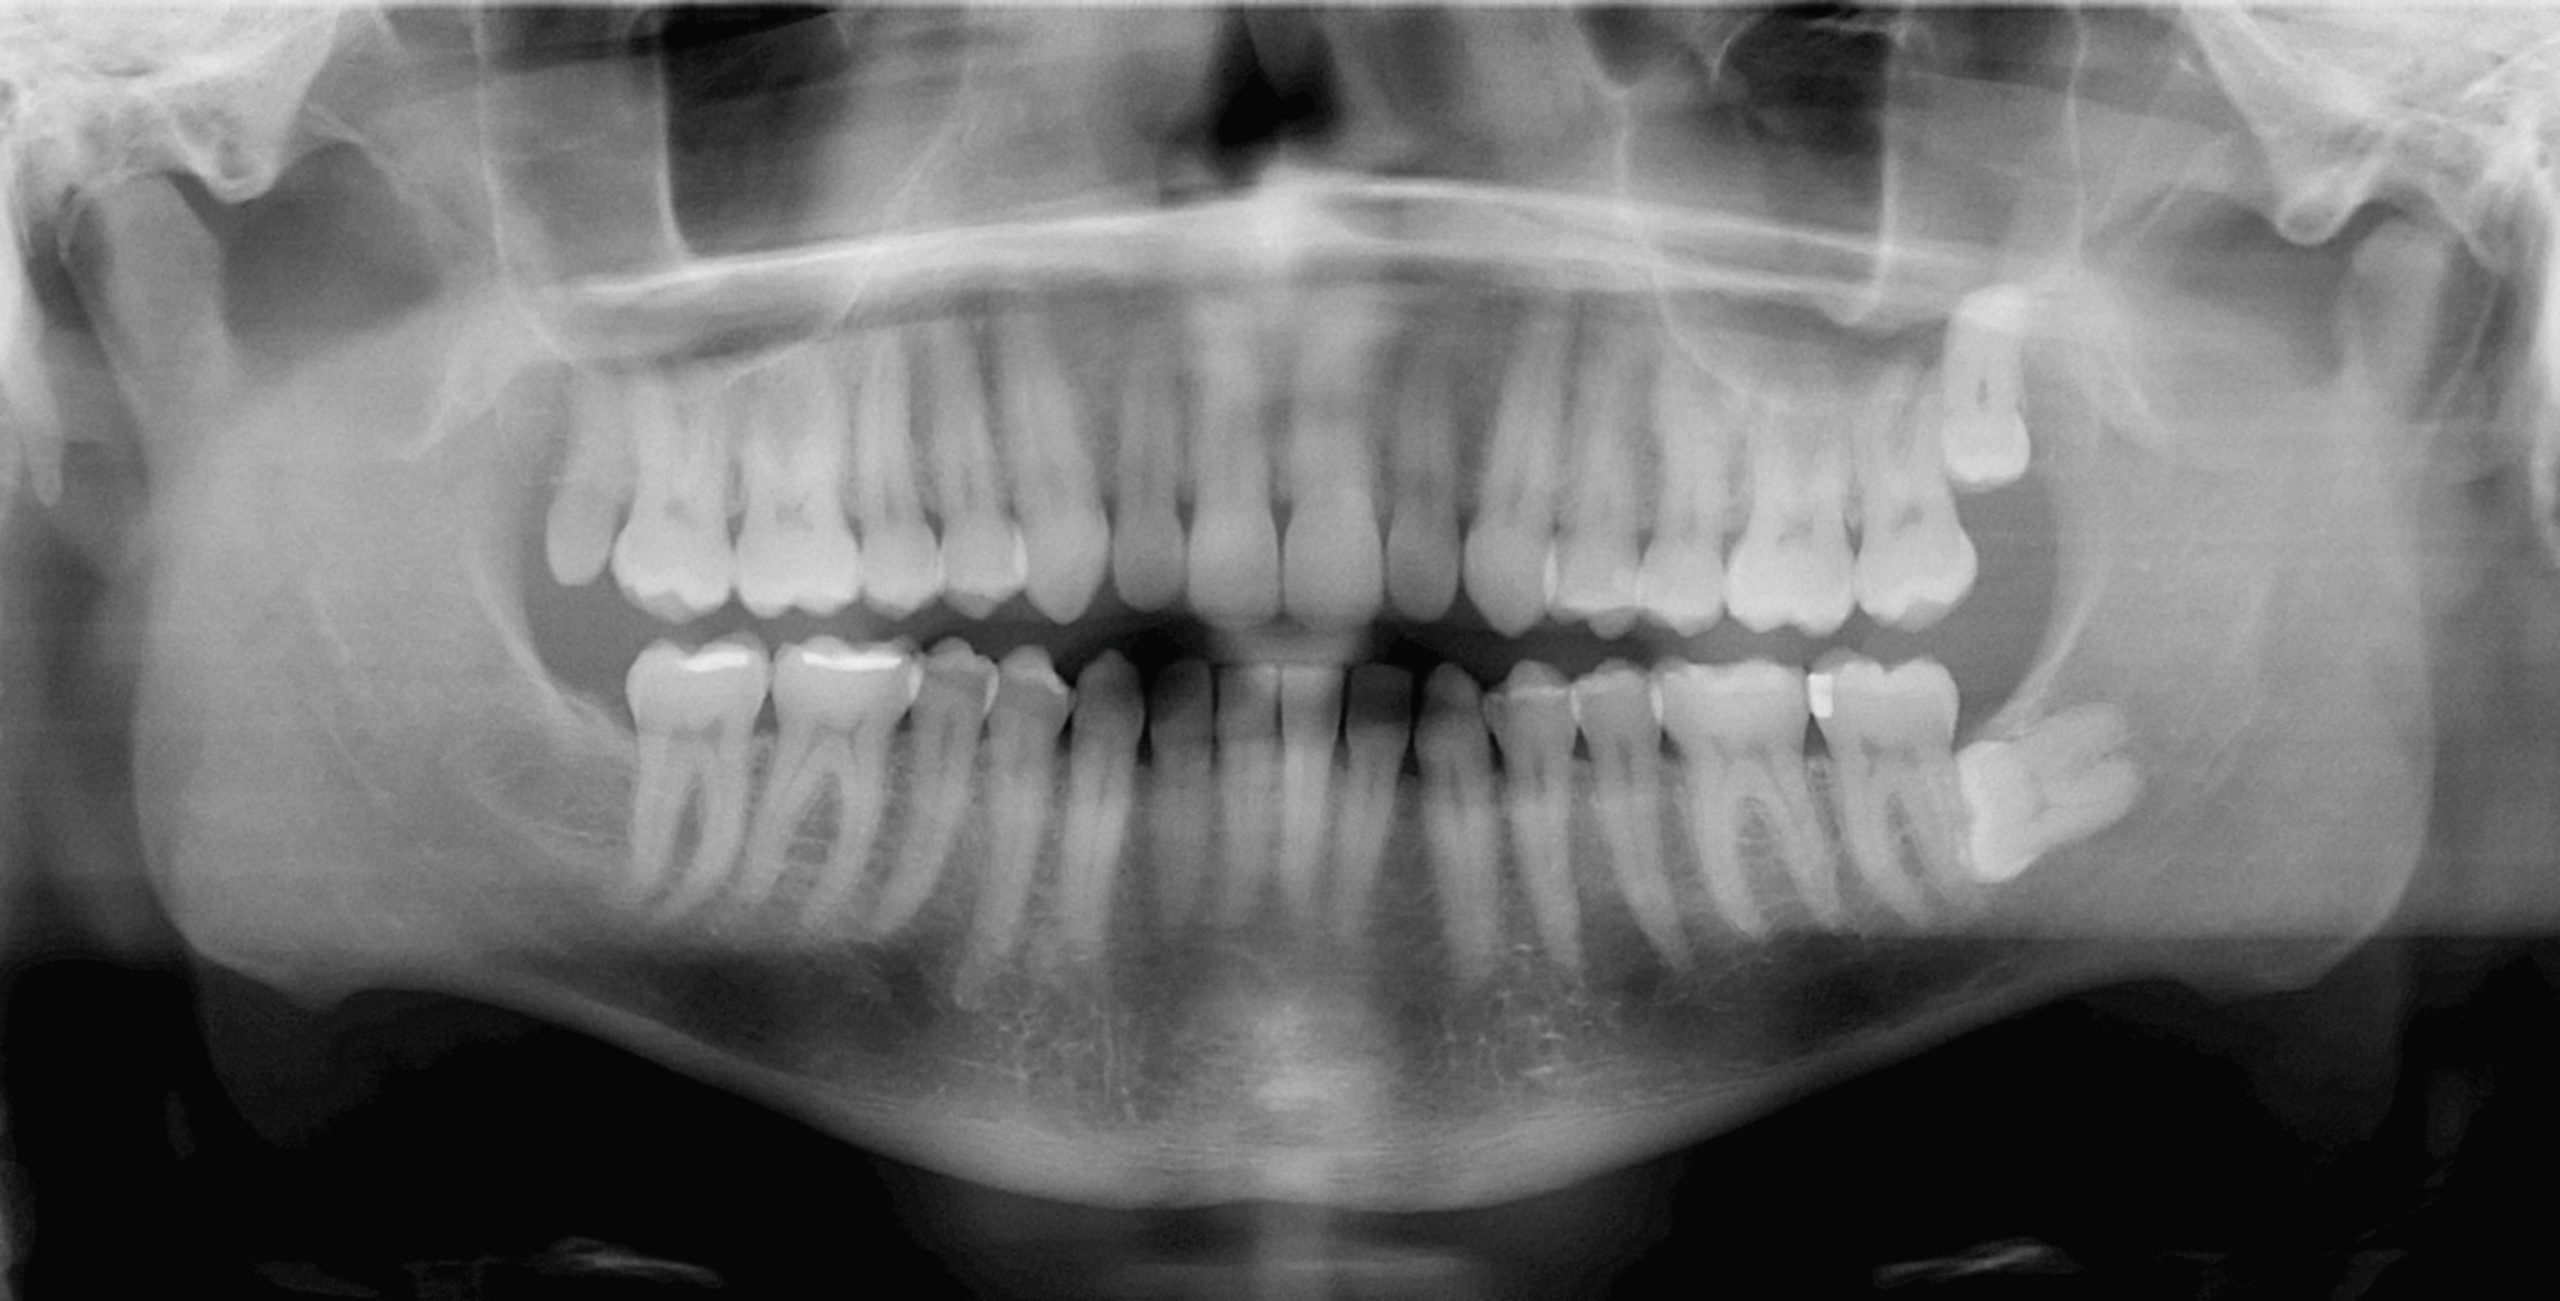 impacted wisdom tooth extraction - Schaumburg, IL